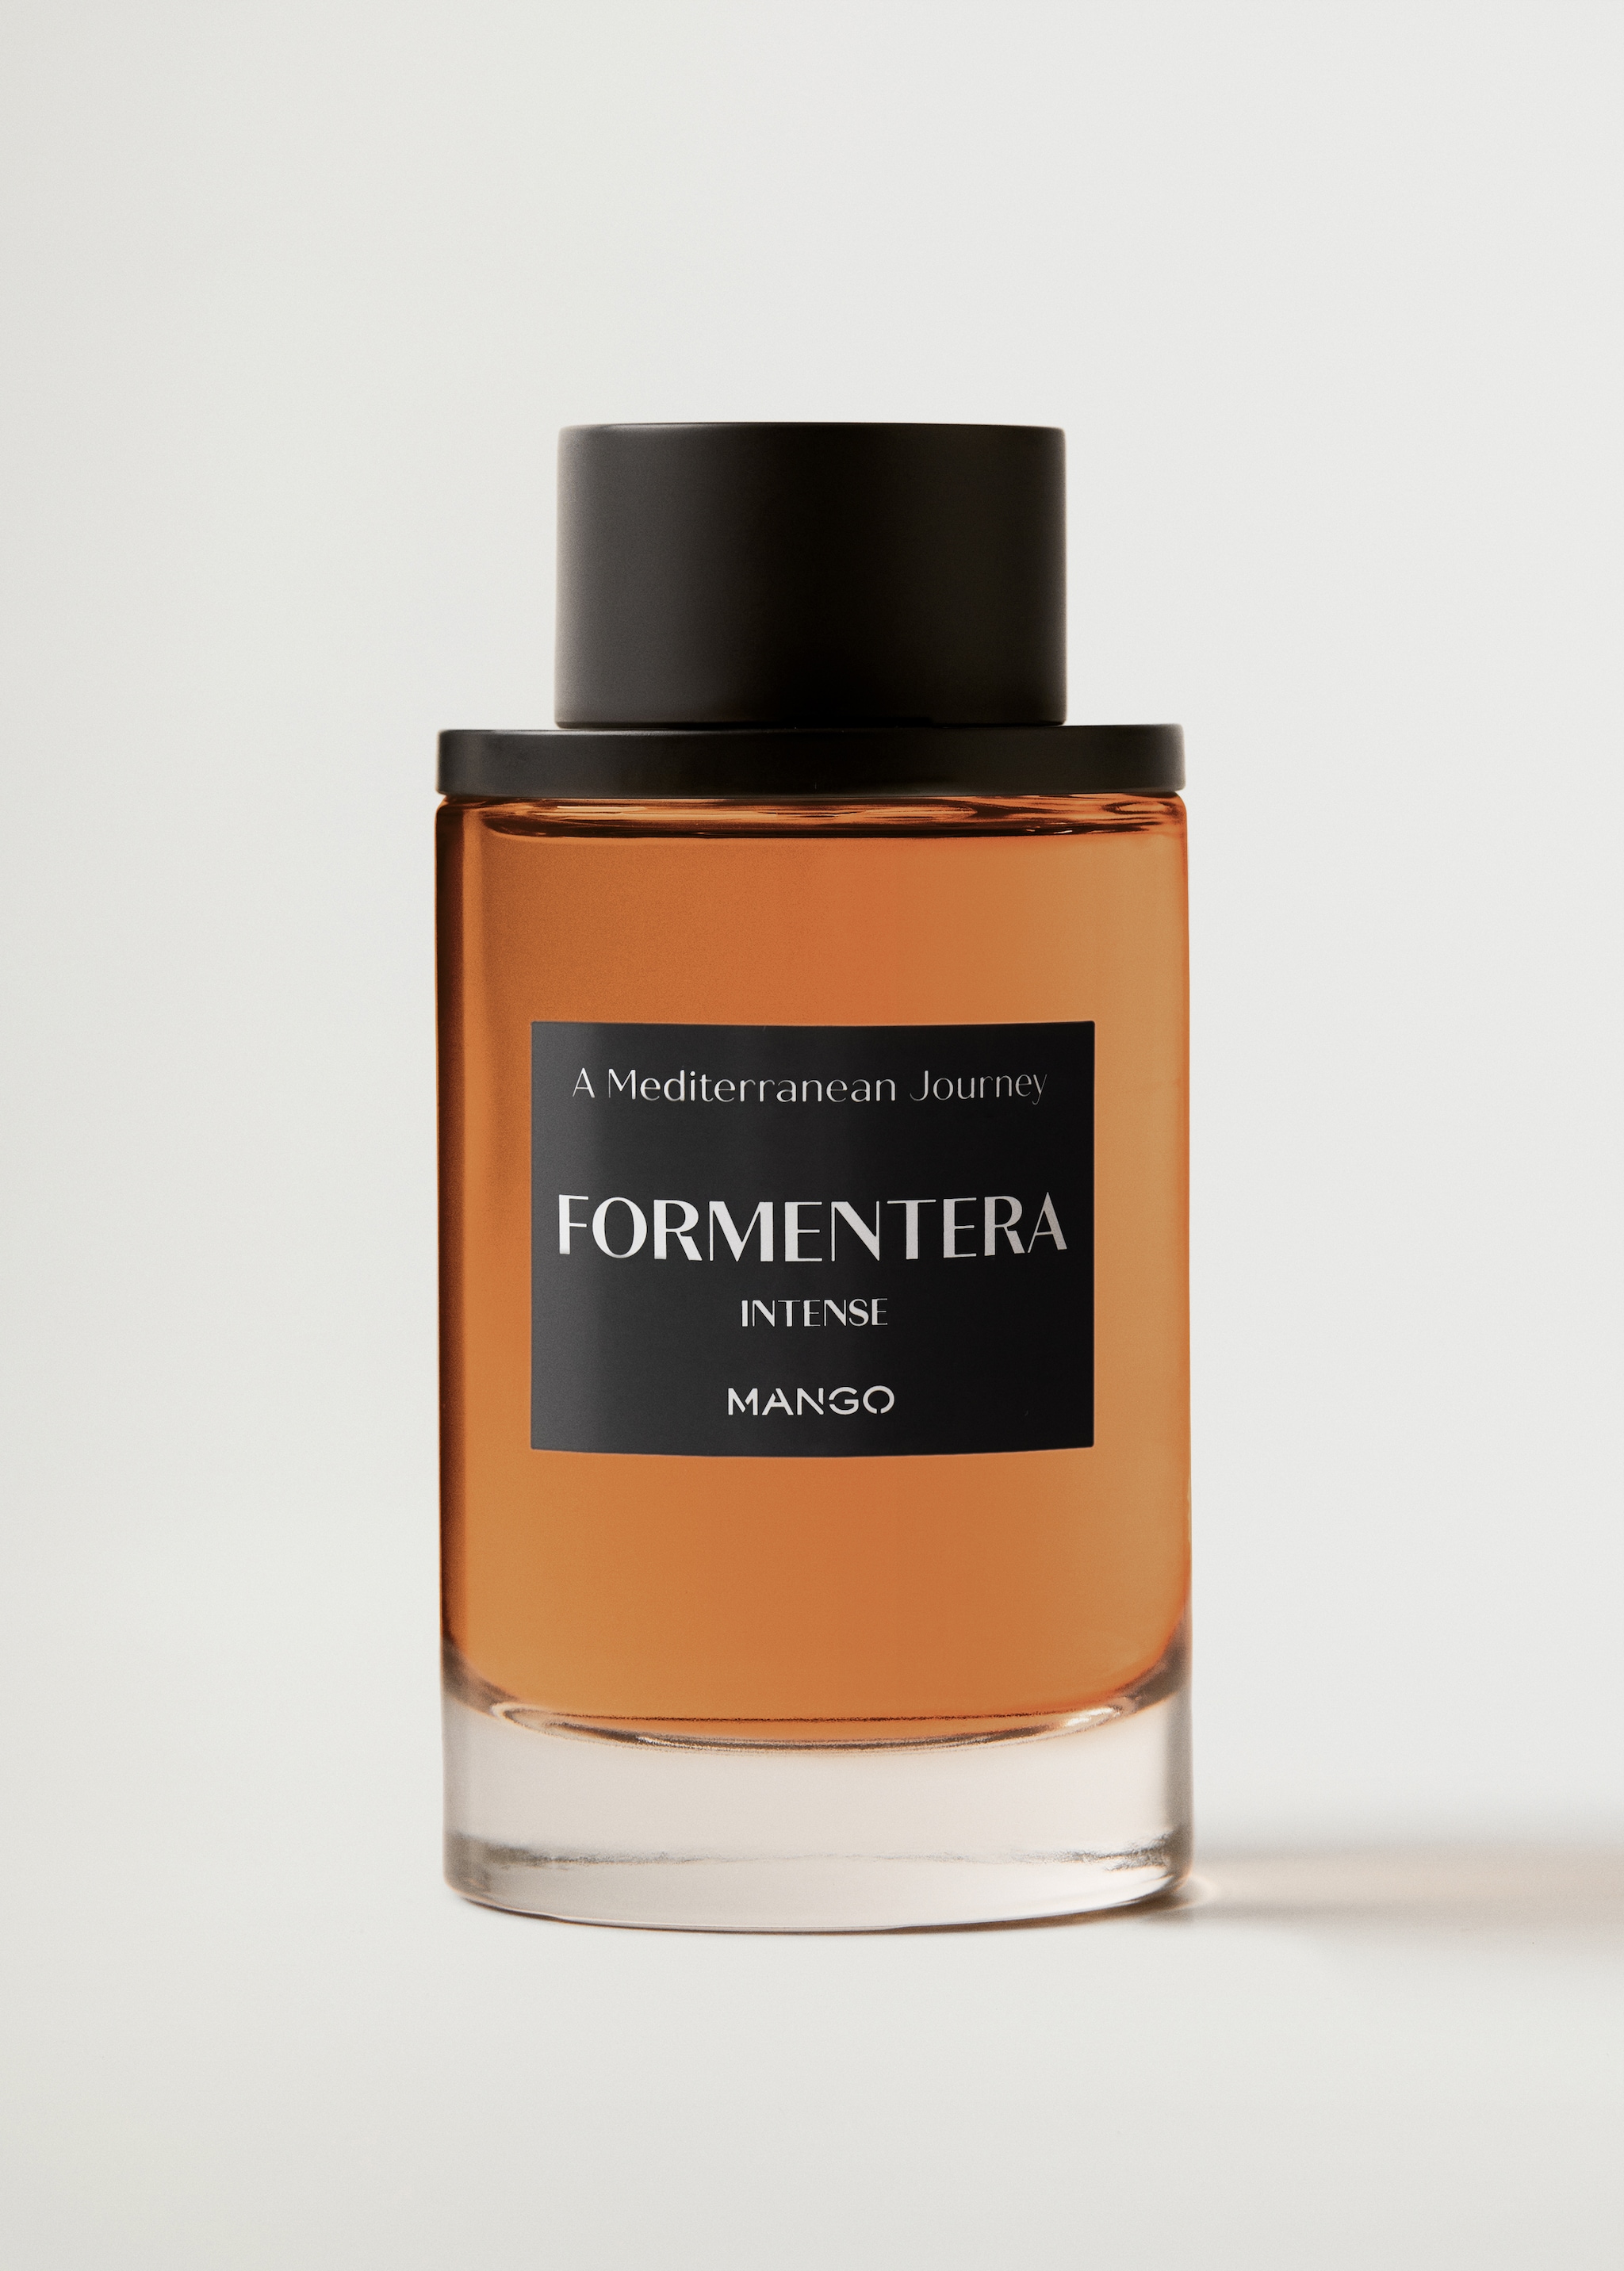 Fragrance Formentera Intense 100 ml - Article without model